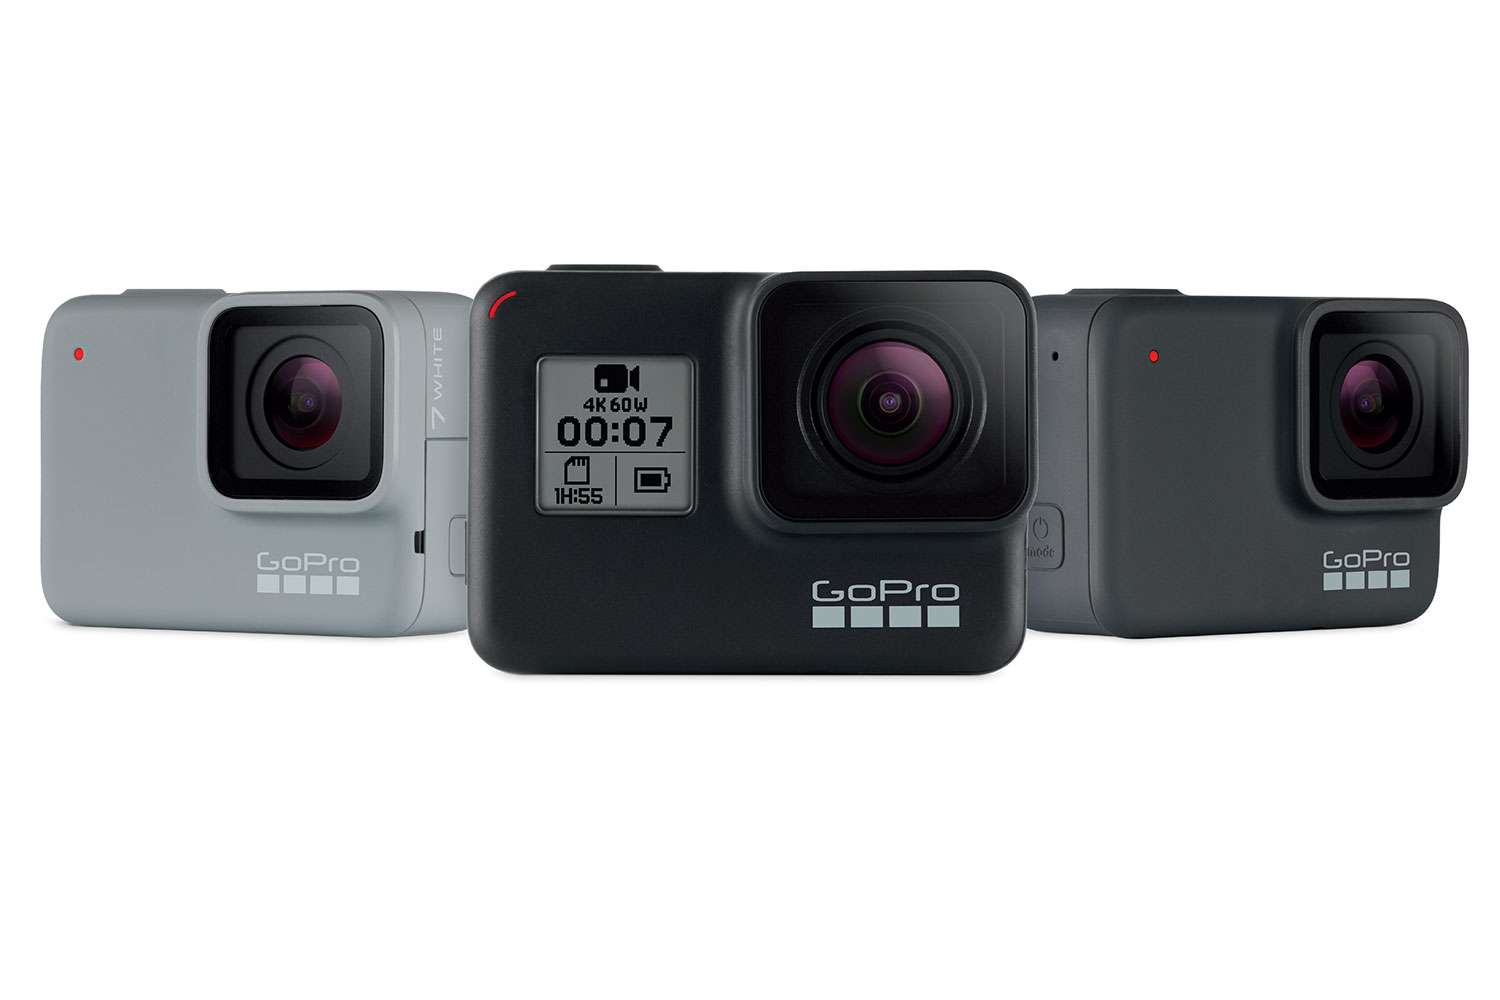 <p><b>GoPro Hero7, $199-$399</b></p> HyperSmooth is the best in-camera video stabilization ever featured in a camera. It makes it easy to capture professional-looking, gimbal-like stabilized video without the expense or hassle of a motorized gimbal. And HyperSmooth works underwater and in high-shock and wind situations where gimbals fail. Hero7 Black has HyperSmooth video stabilization.</p> With Hero7 Black, GoPro is also introducing a radical new form of video called TimeWarp. TimeWarp Video applies a high-speed, âmagic-carpet-rideâ effect to your videos. Imagine a scenic drive, ocean dive or walk through the city compressed into a super-stabilized, sped-up version of itself, with the entire experience playing out in seconds. TimeWarp Video transforms longer experiences into short, flowing videos that are compelling to watch and easy to share. <br> <a href=